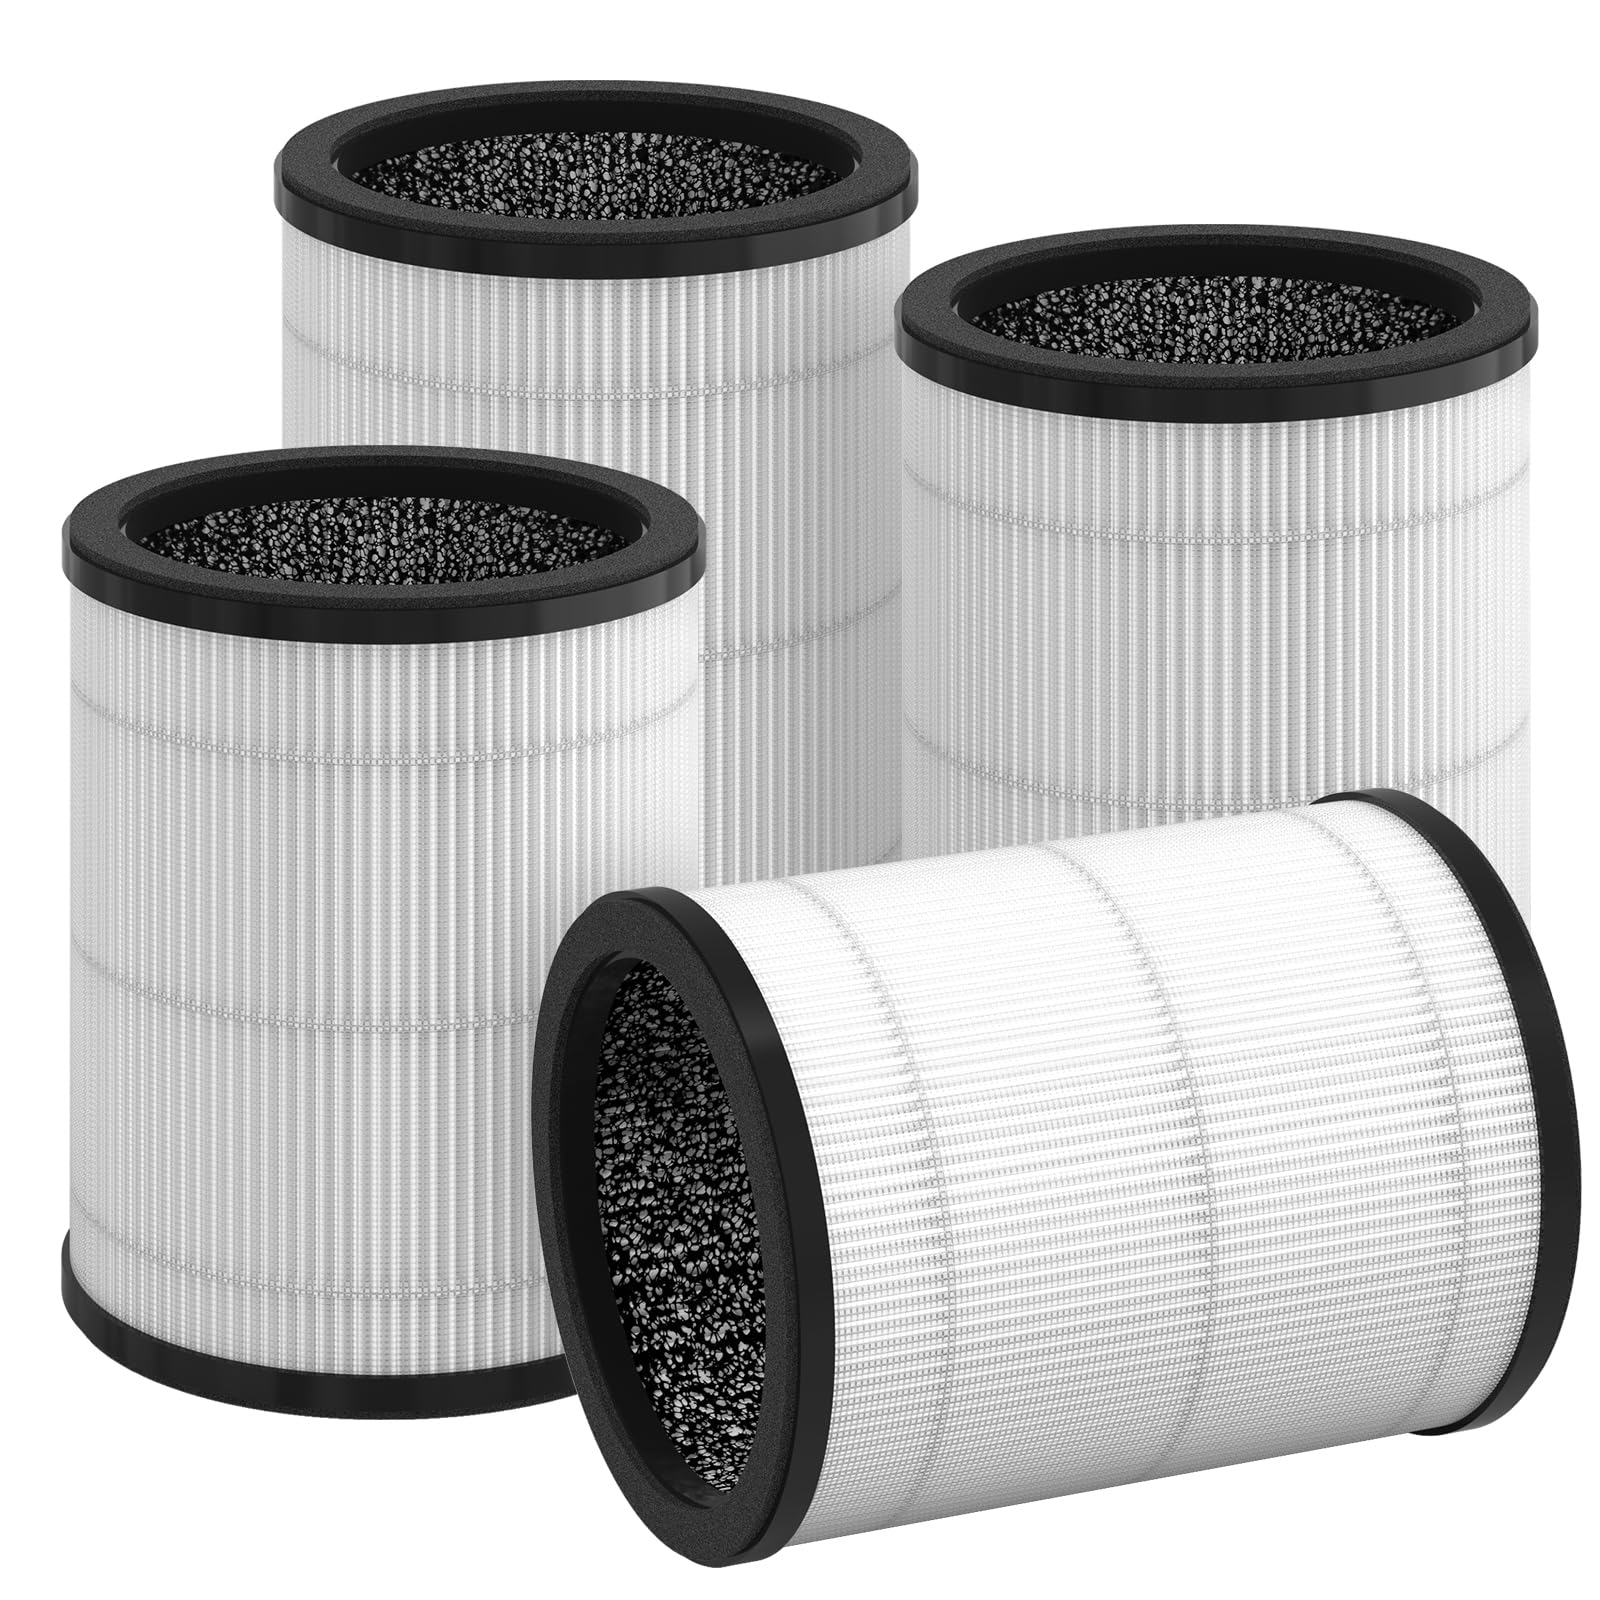 GoKBNY KJ80 True HEPA Replacement Filter Compatible with Druiap KJ80 Purifier, Compared to part# AF3080, 3-in-1 H13 True HEPA Filters（4-Pack）